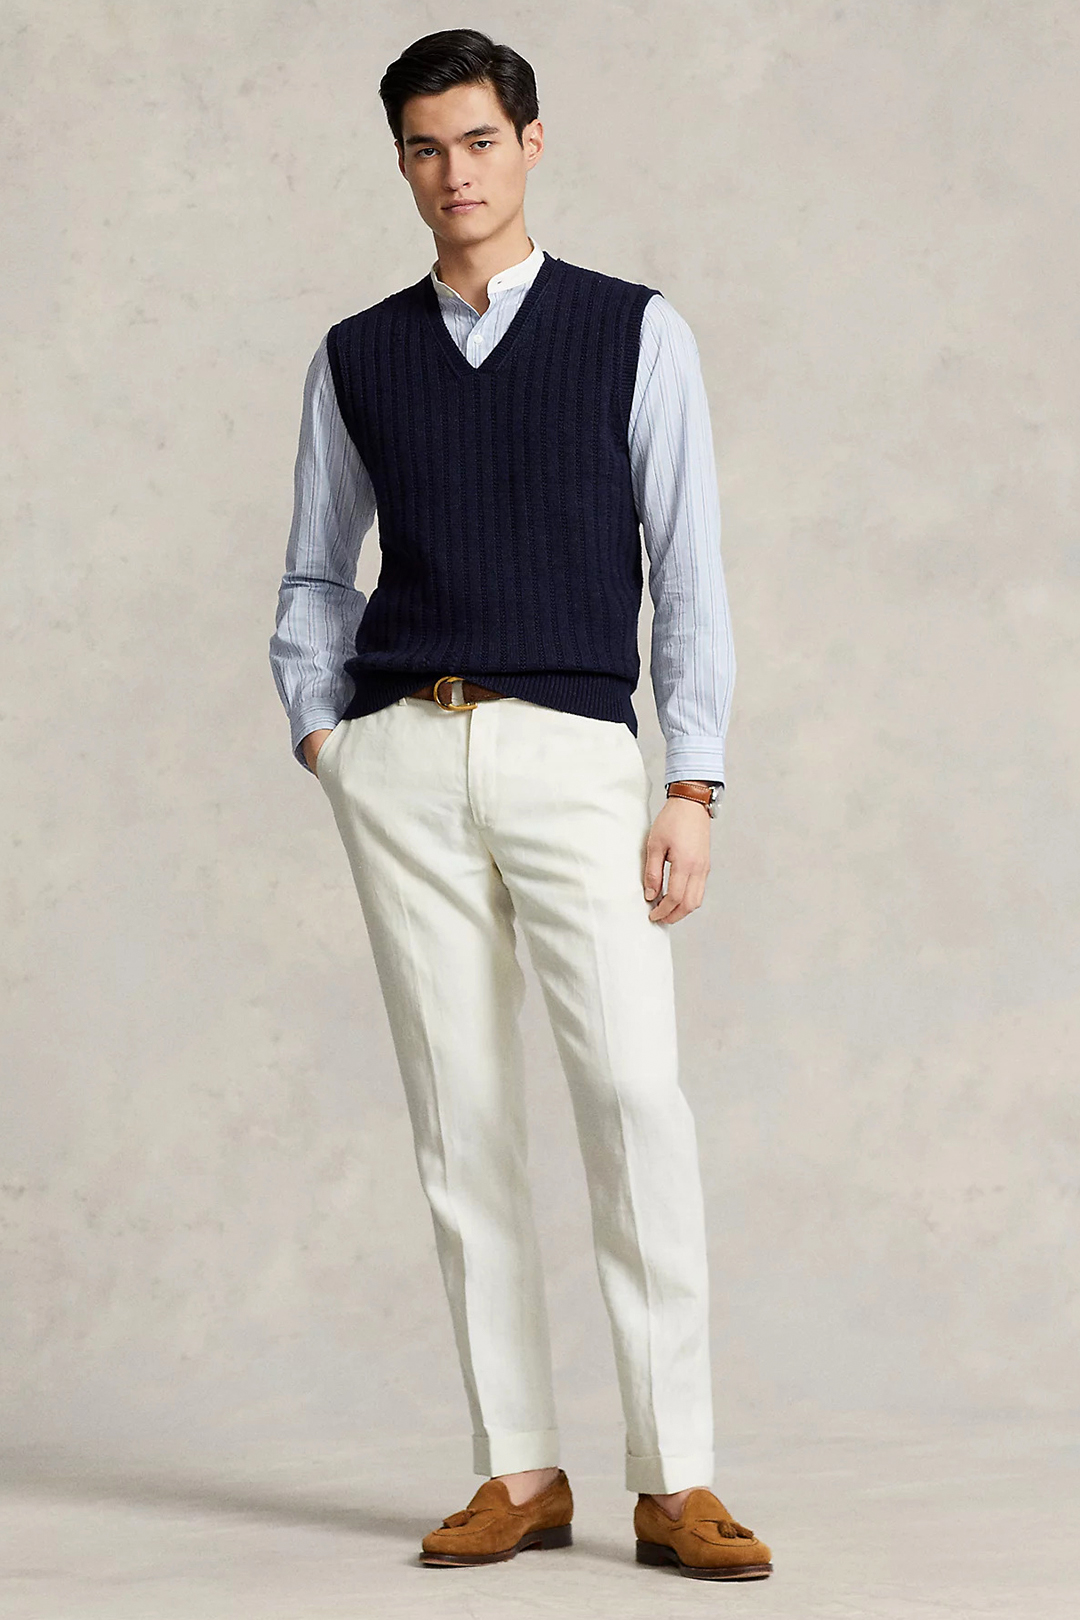 Navy sweater vest, blue and white shirt, off white dress pants and brown loafers outfit